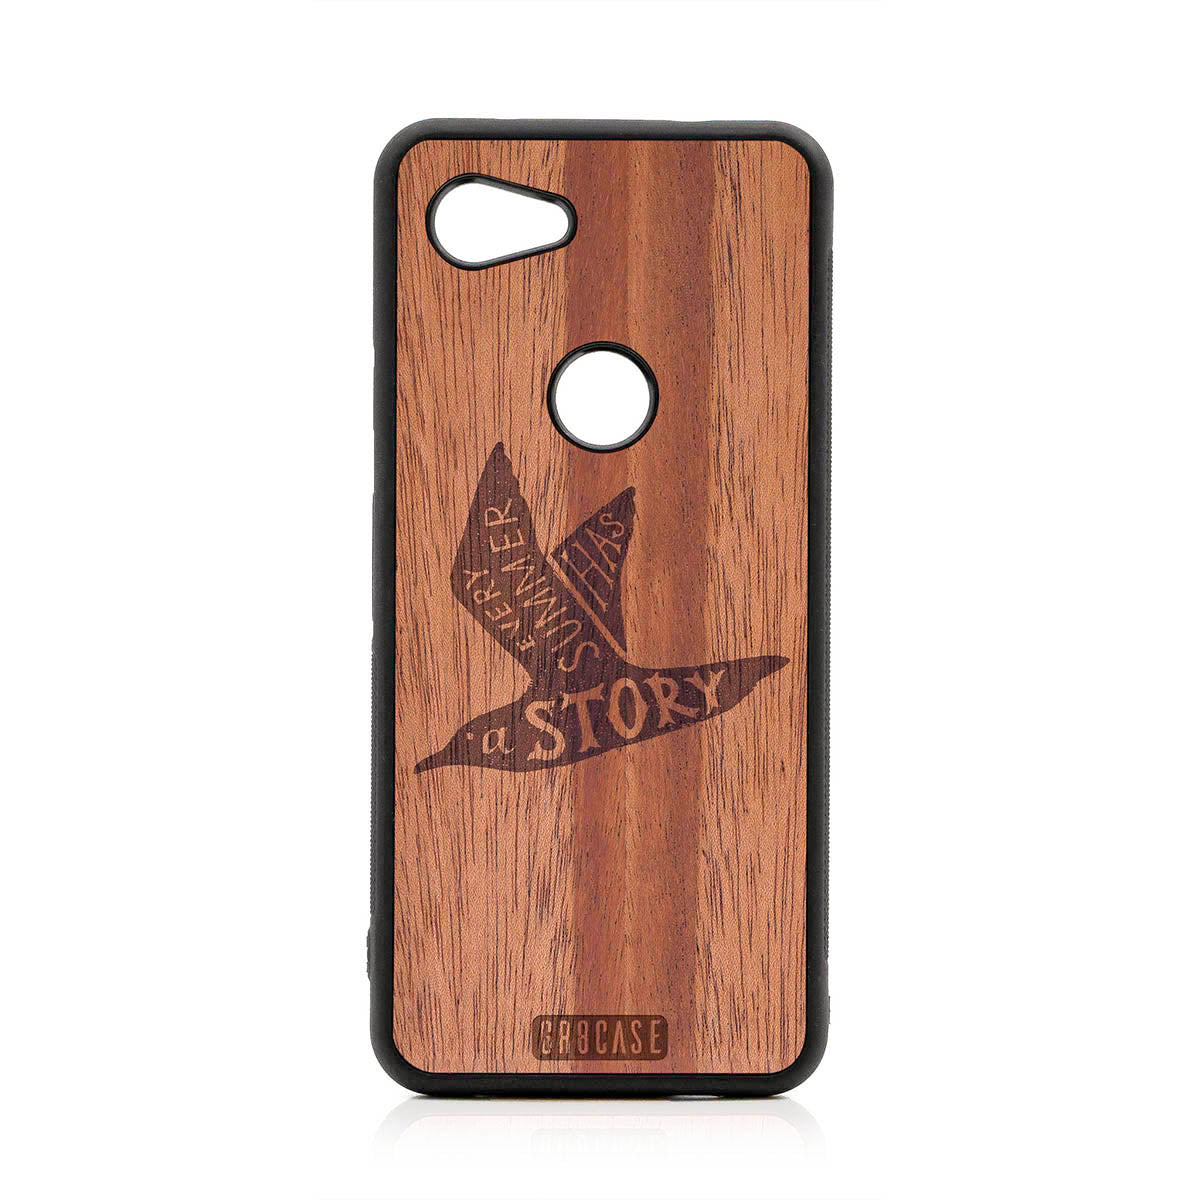 Every Summer Has A Story (Seagull) Design Wood Case For Google Pixel 3A XL